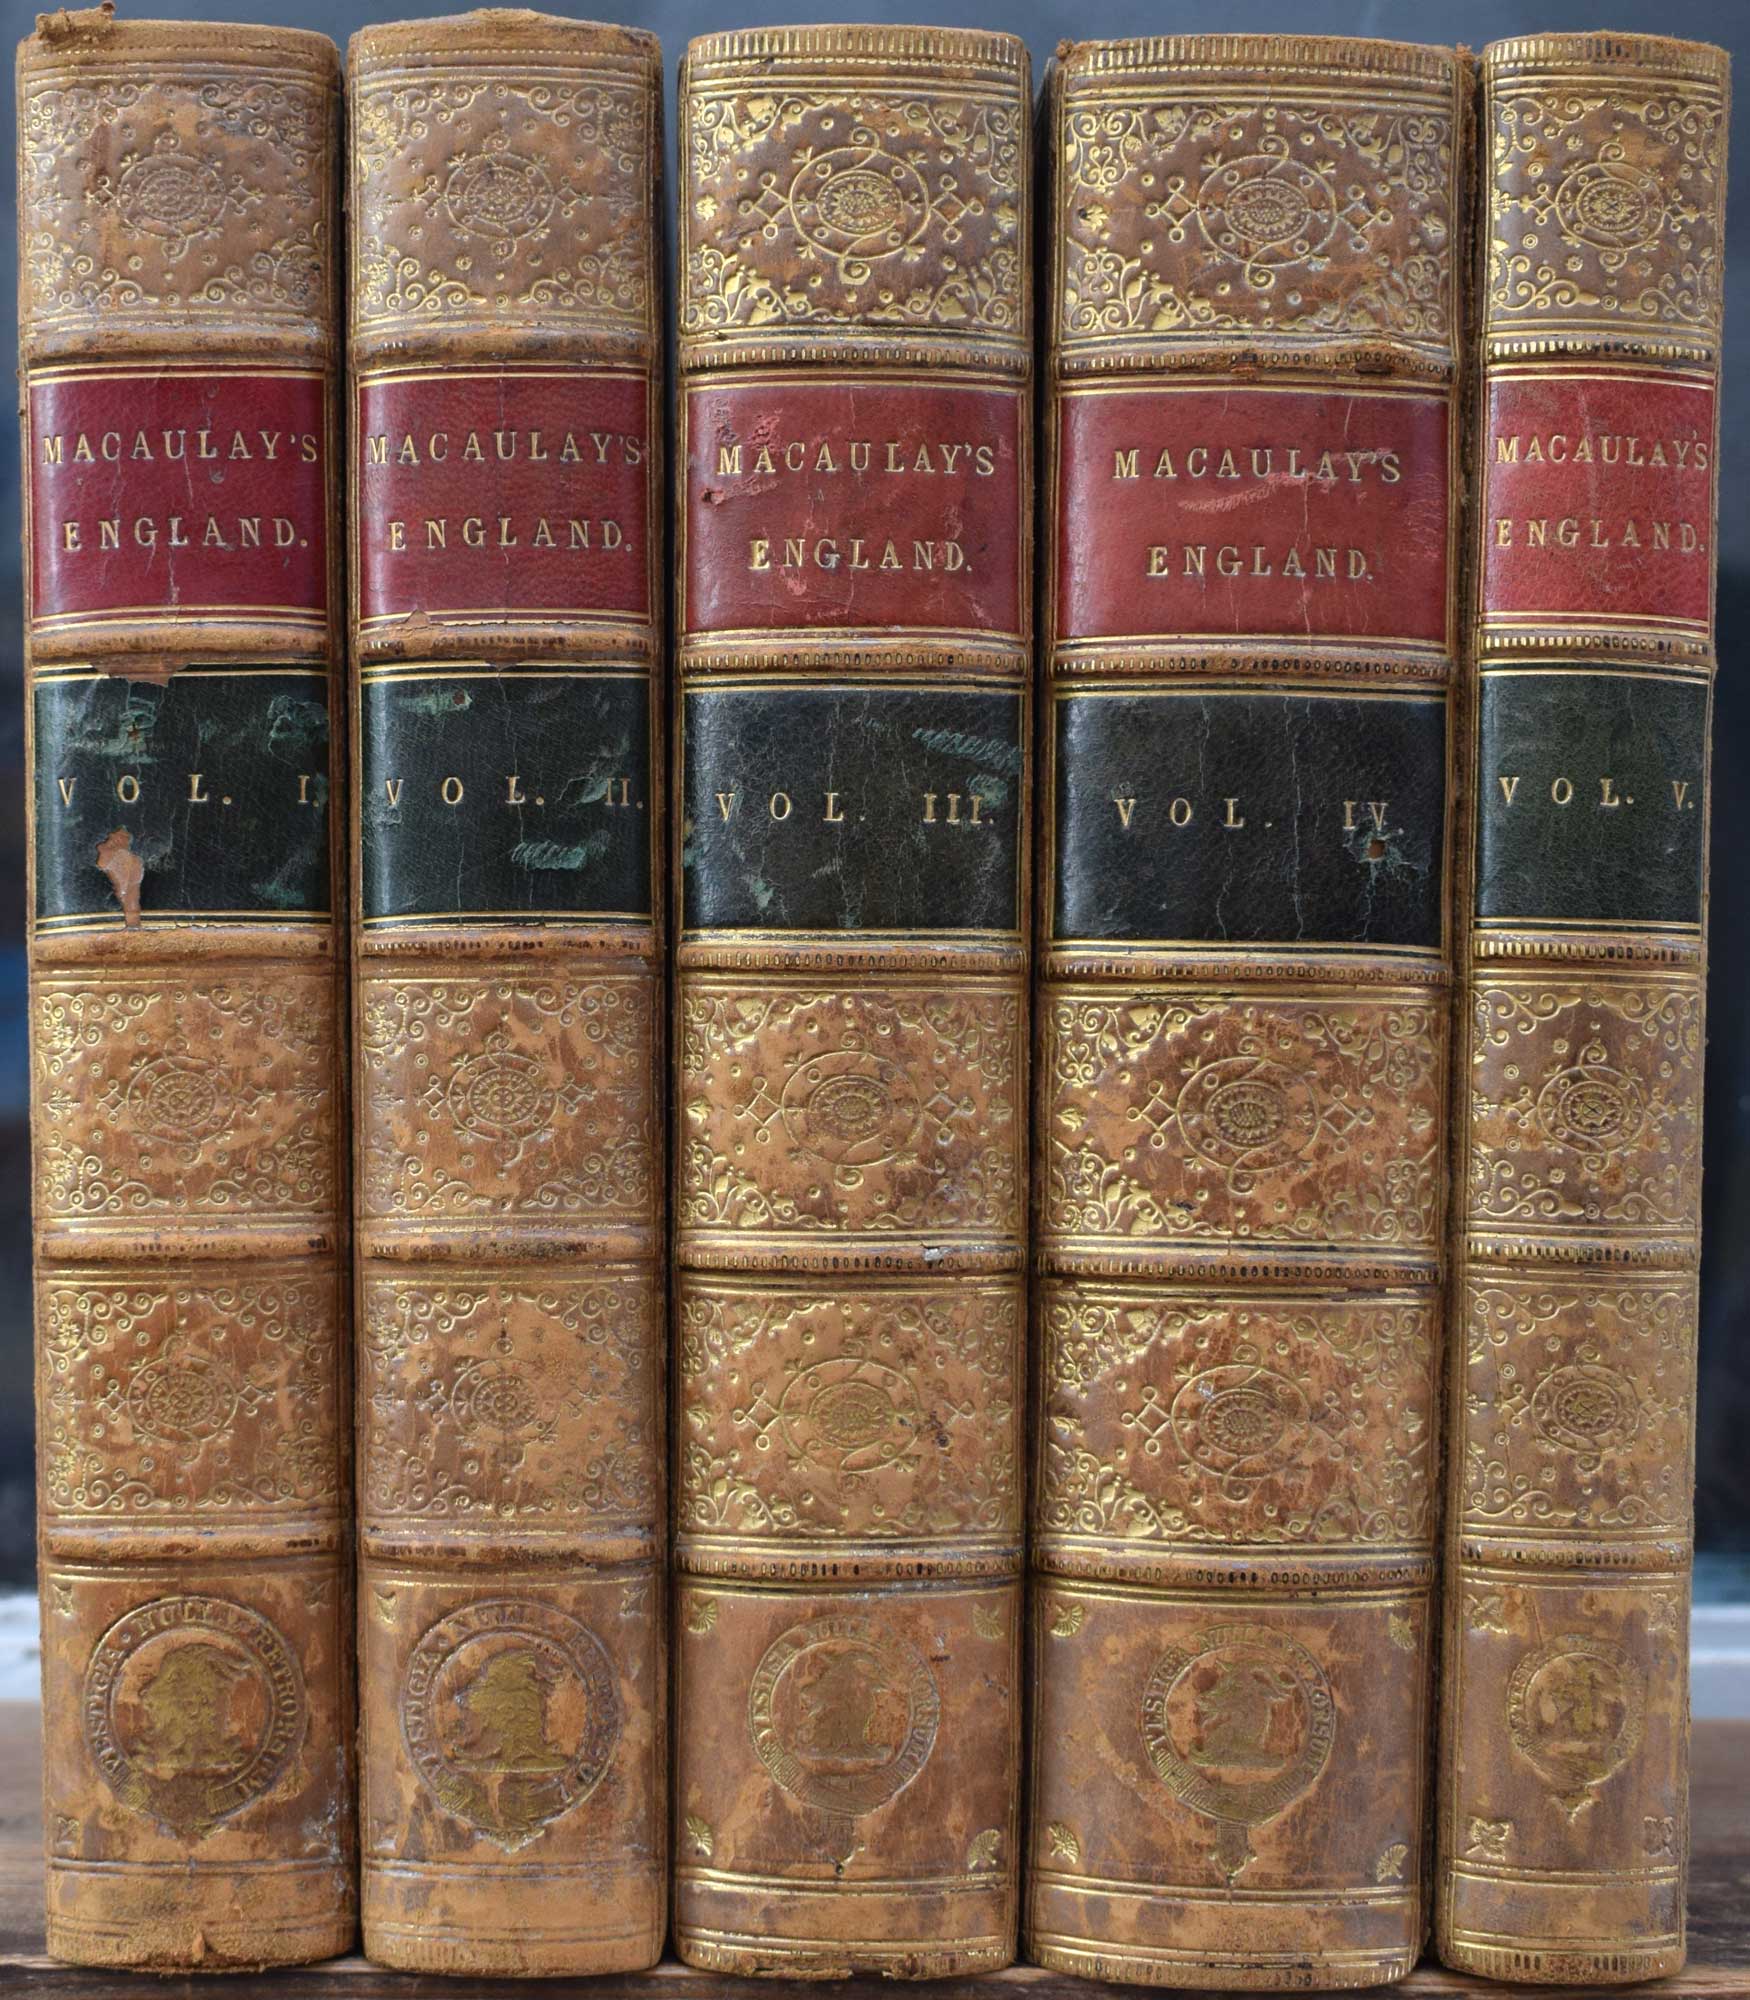 The History of England from the Accession of James the Second. 5 volume set. 1849. Longman edition.